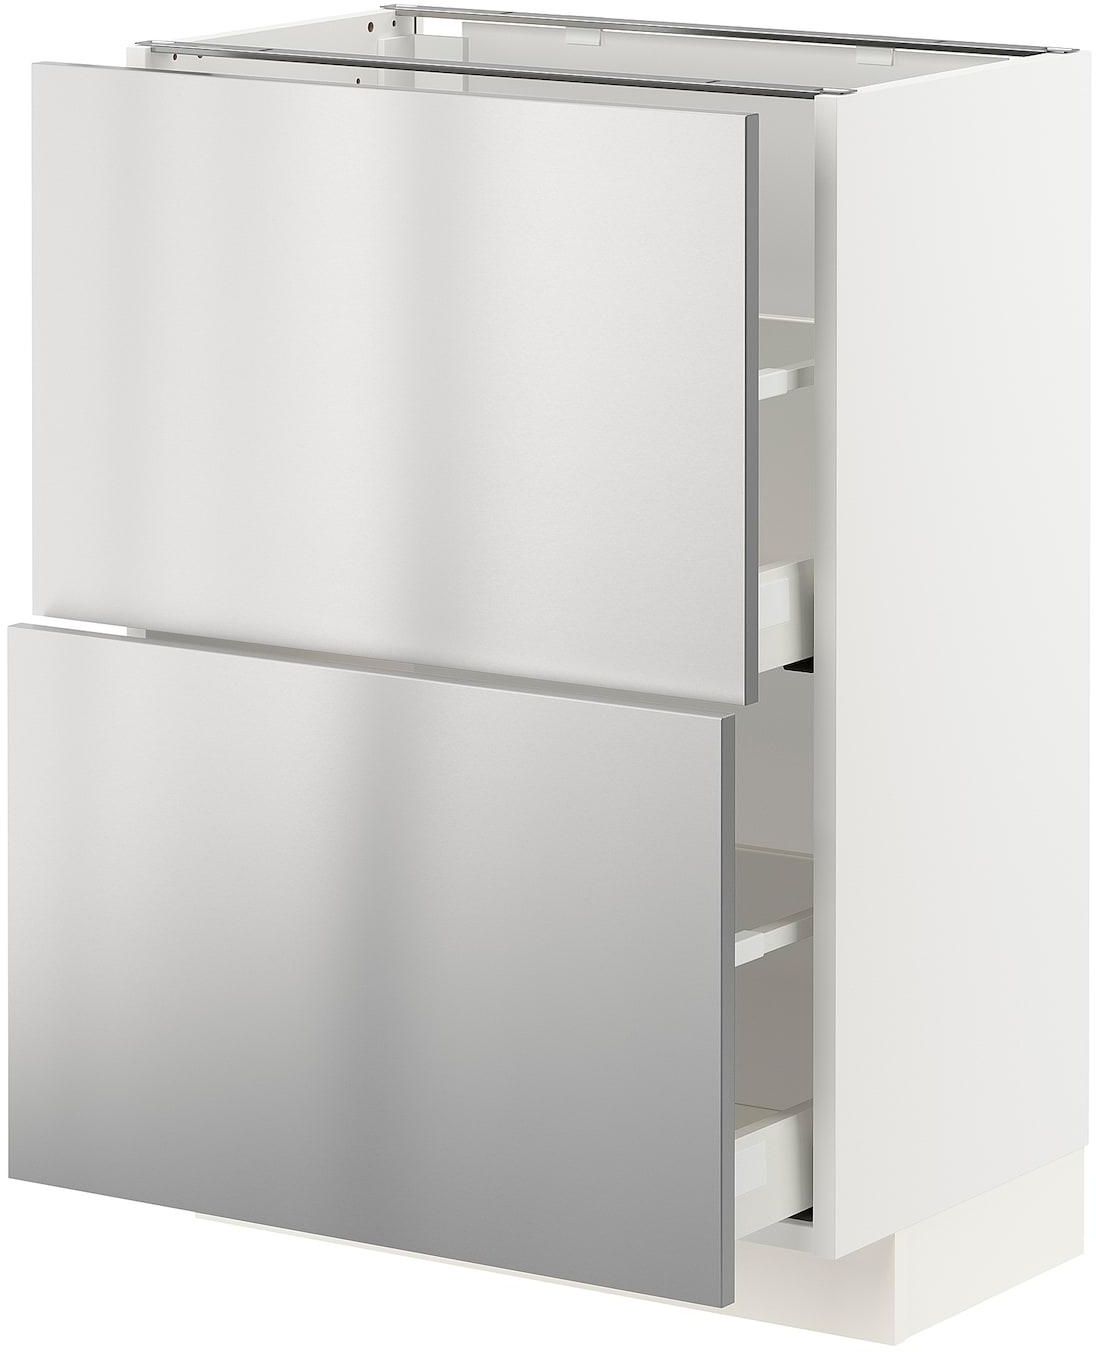 METOD / MAXIMERA Base cabinet with 2 drawers - white/Vårsta stainless steel 60x37 cm